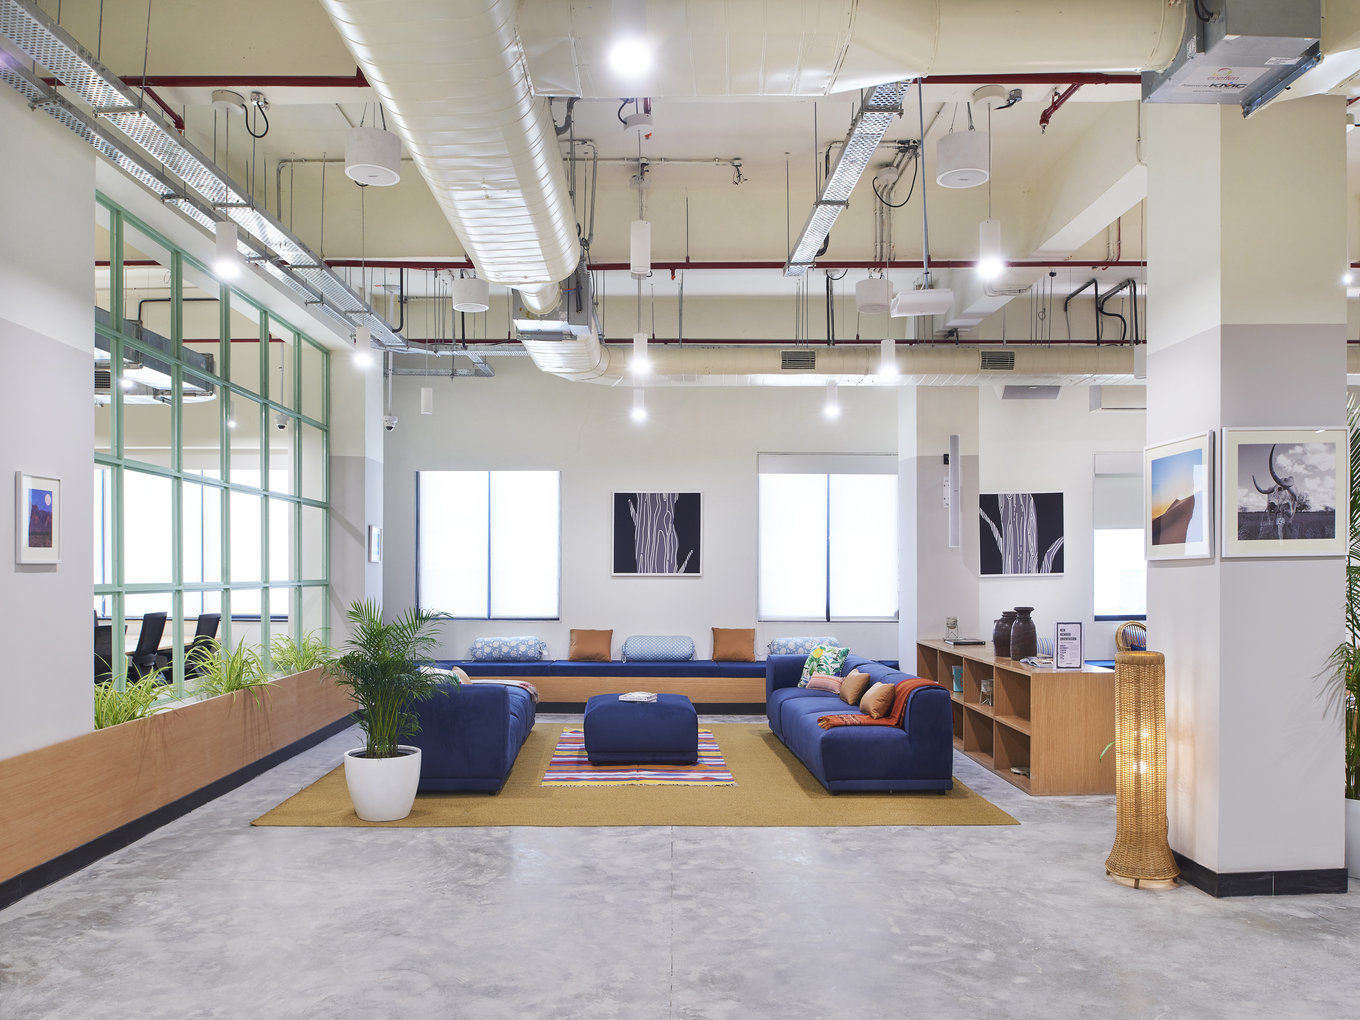 India Boss Karan Virwani On How WeWork Is Different From Other Coworking Companies